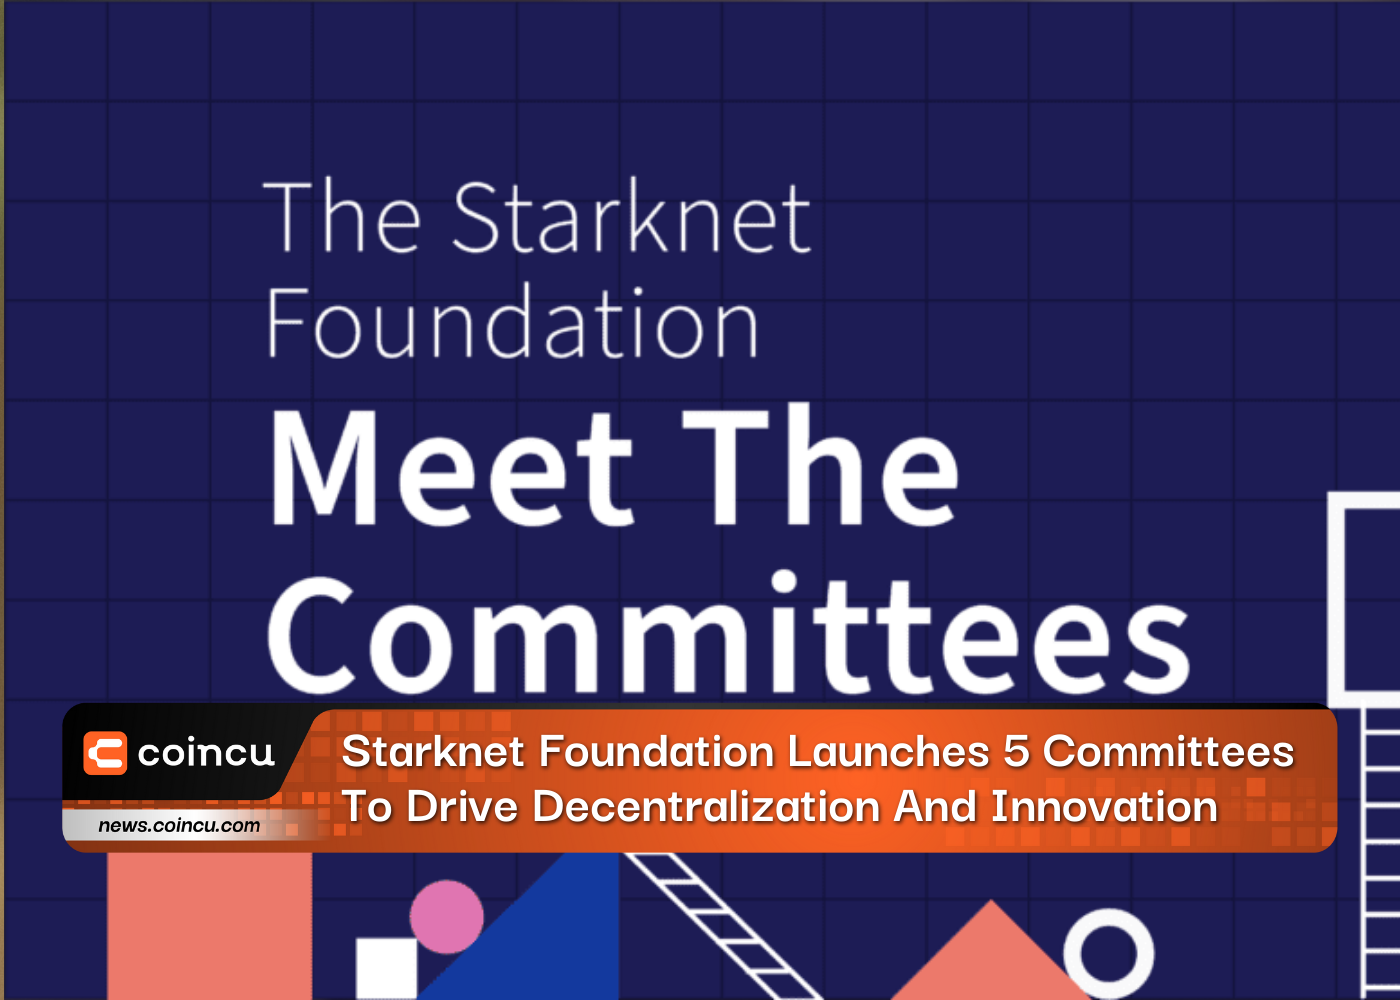 Starknet Foundation Launches 5 Committees To Drive Decentralization And Innovation